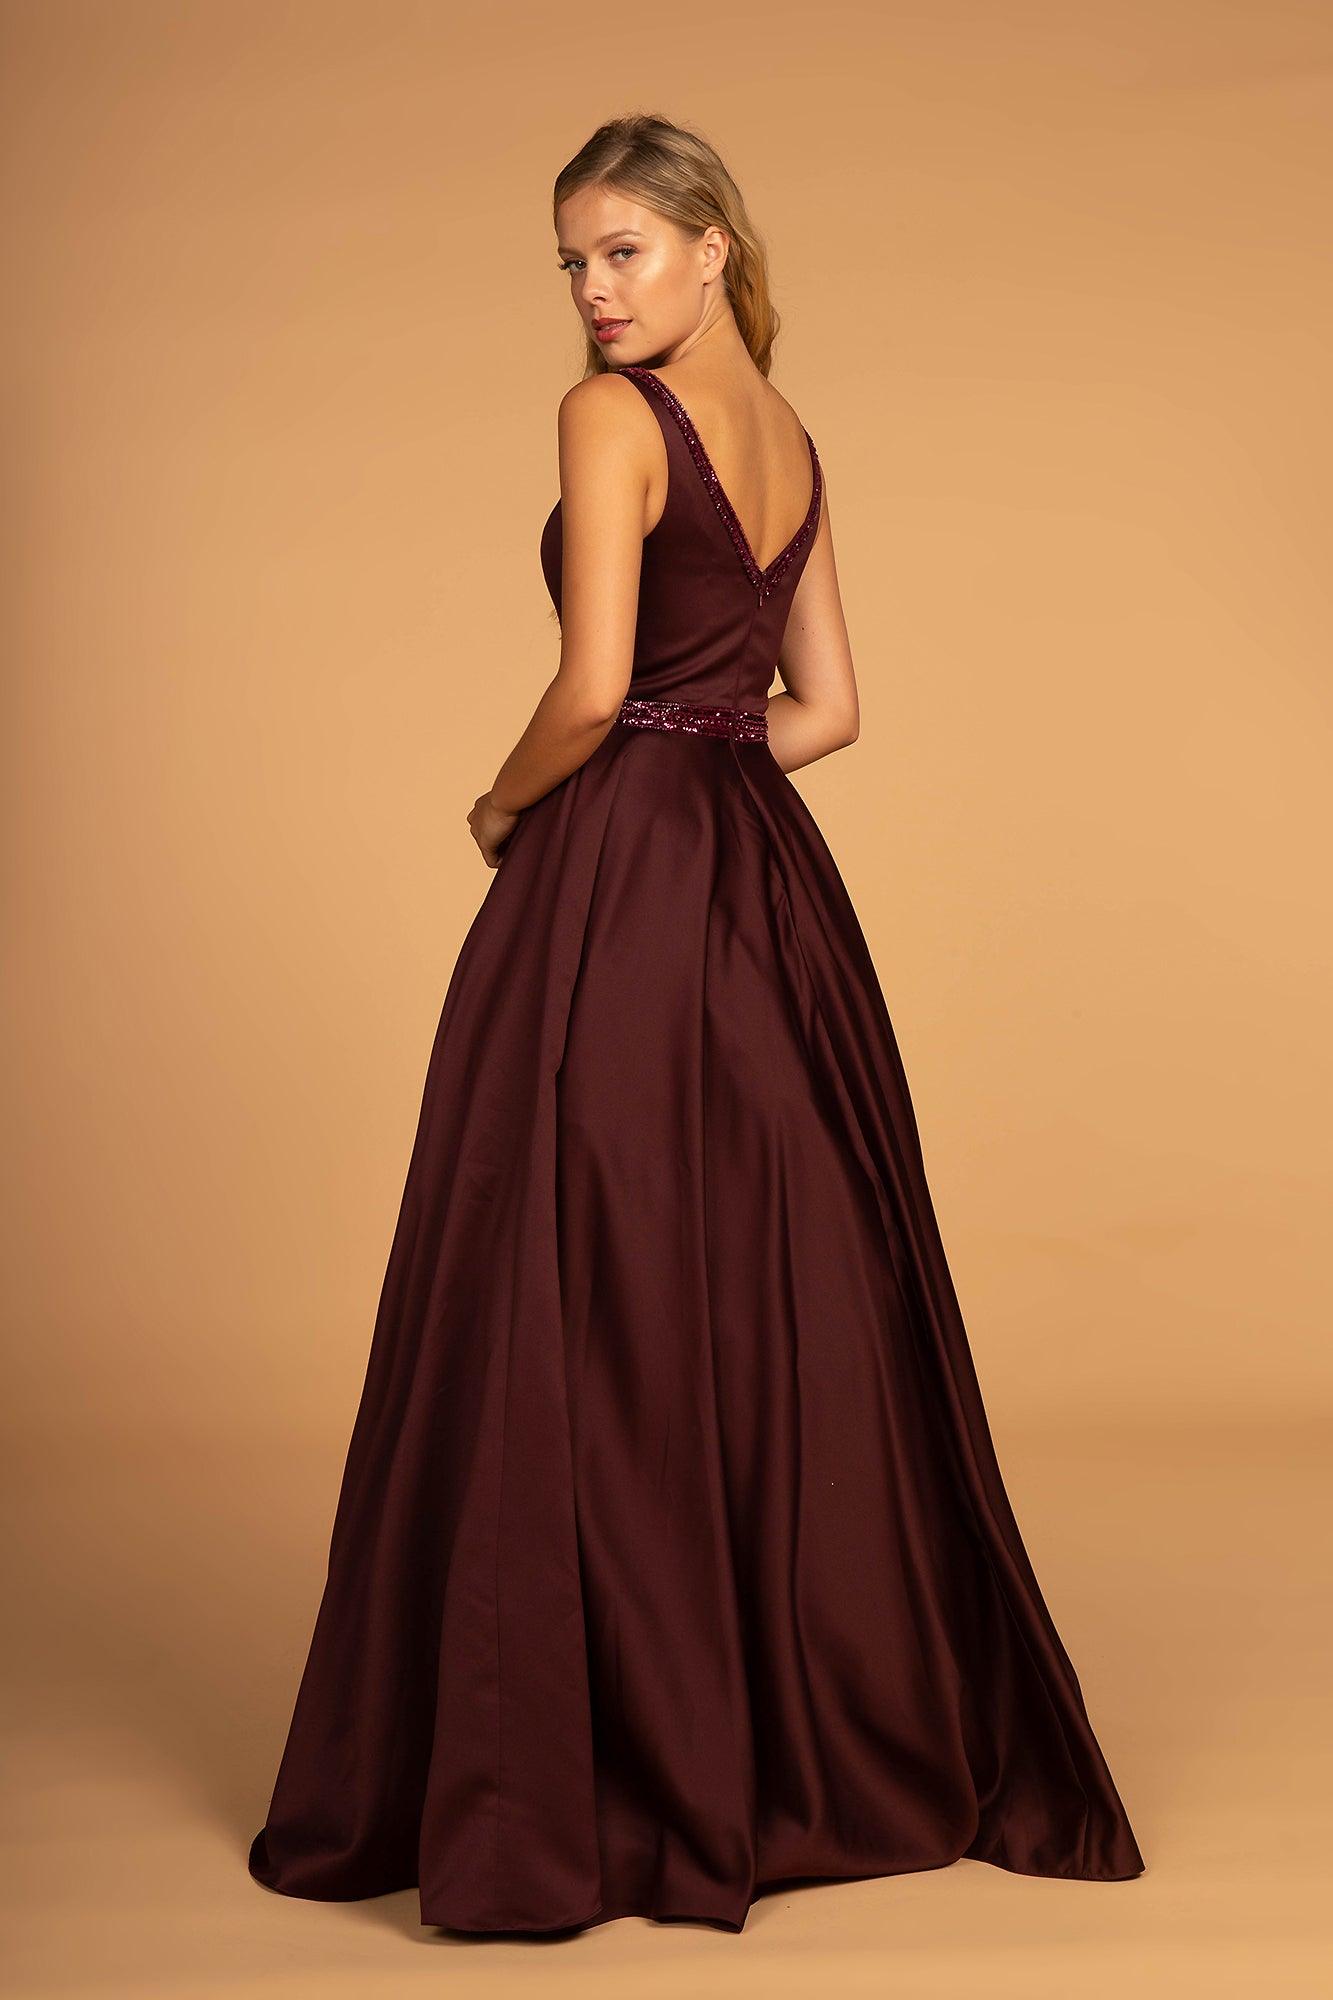 Long Sleeveless Prom Formal Ball Gown - The Dress Outlet Elizabeth K